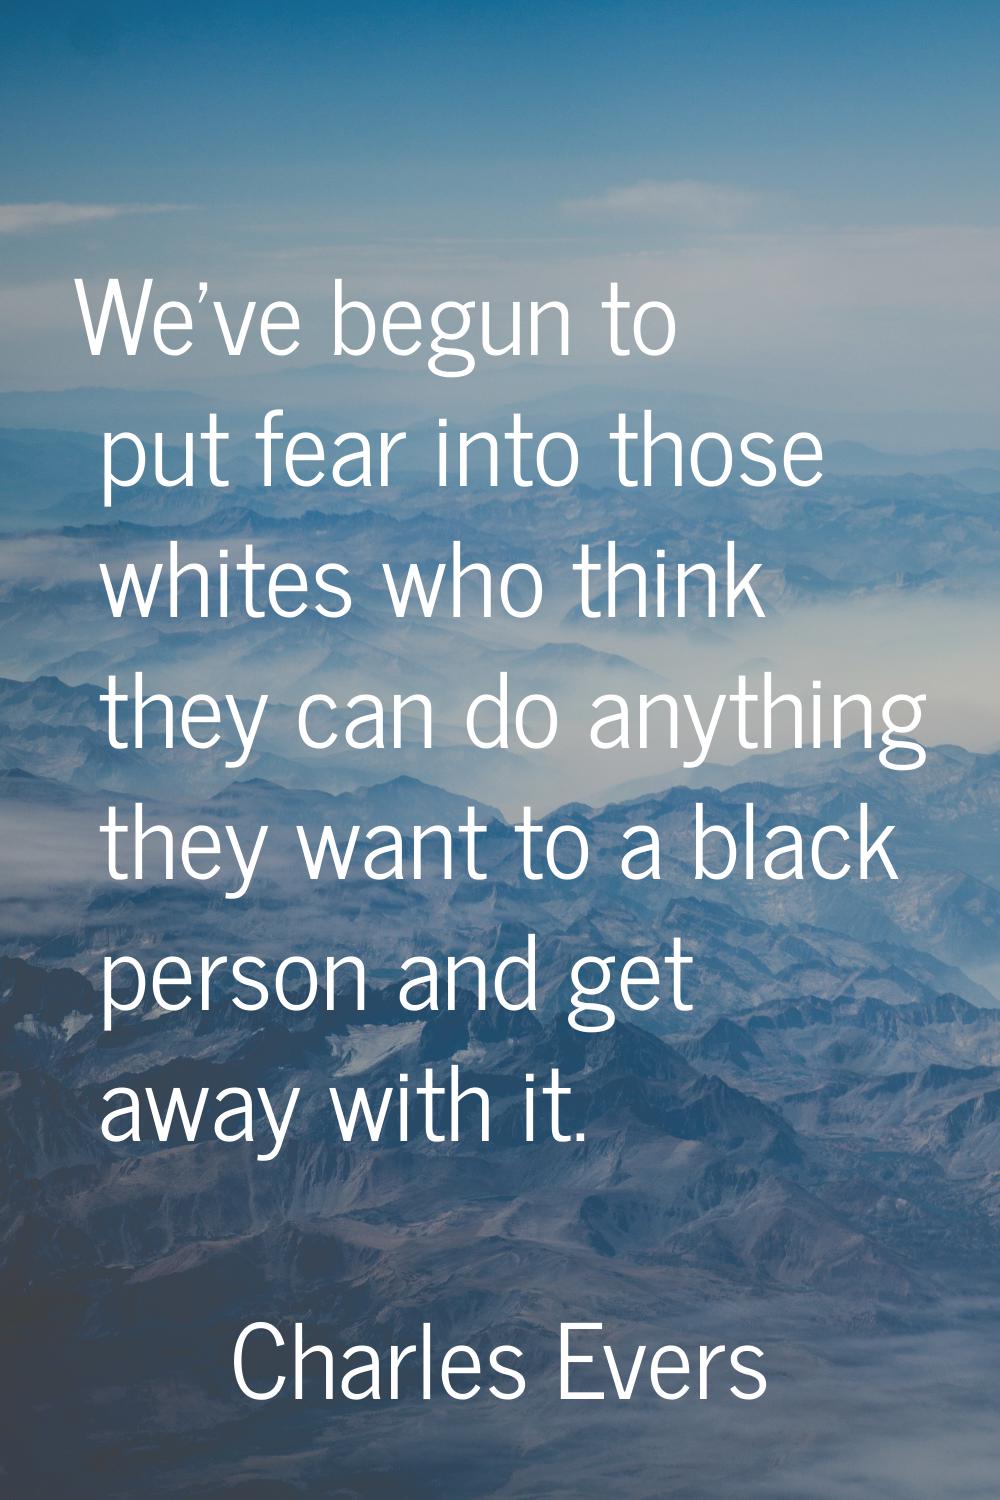 We've begun to put fear into those whites who think they can do anything they want to a black perso